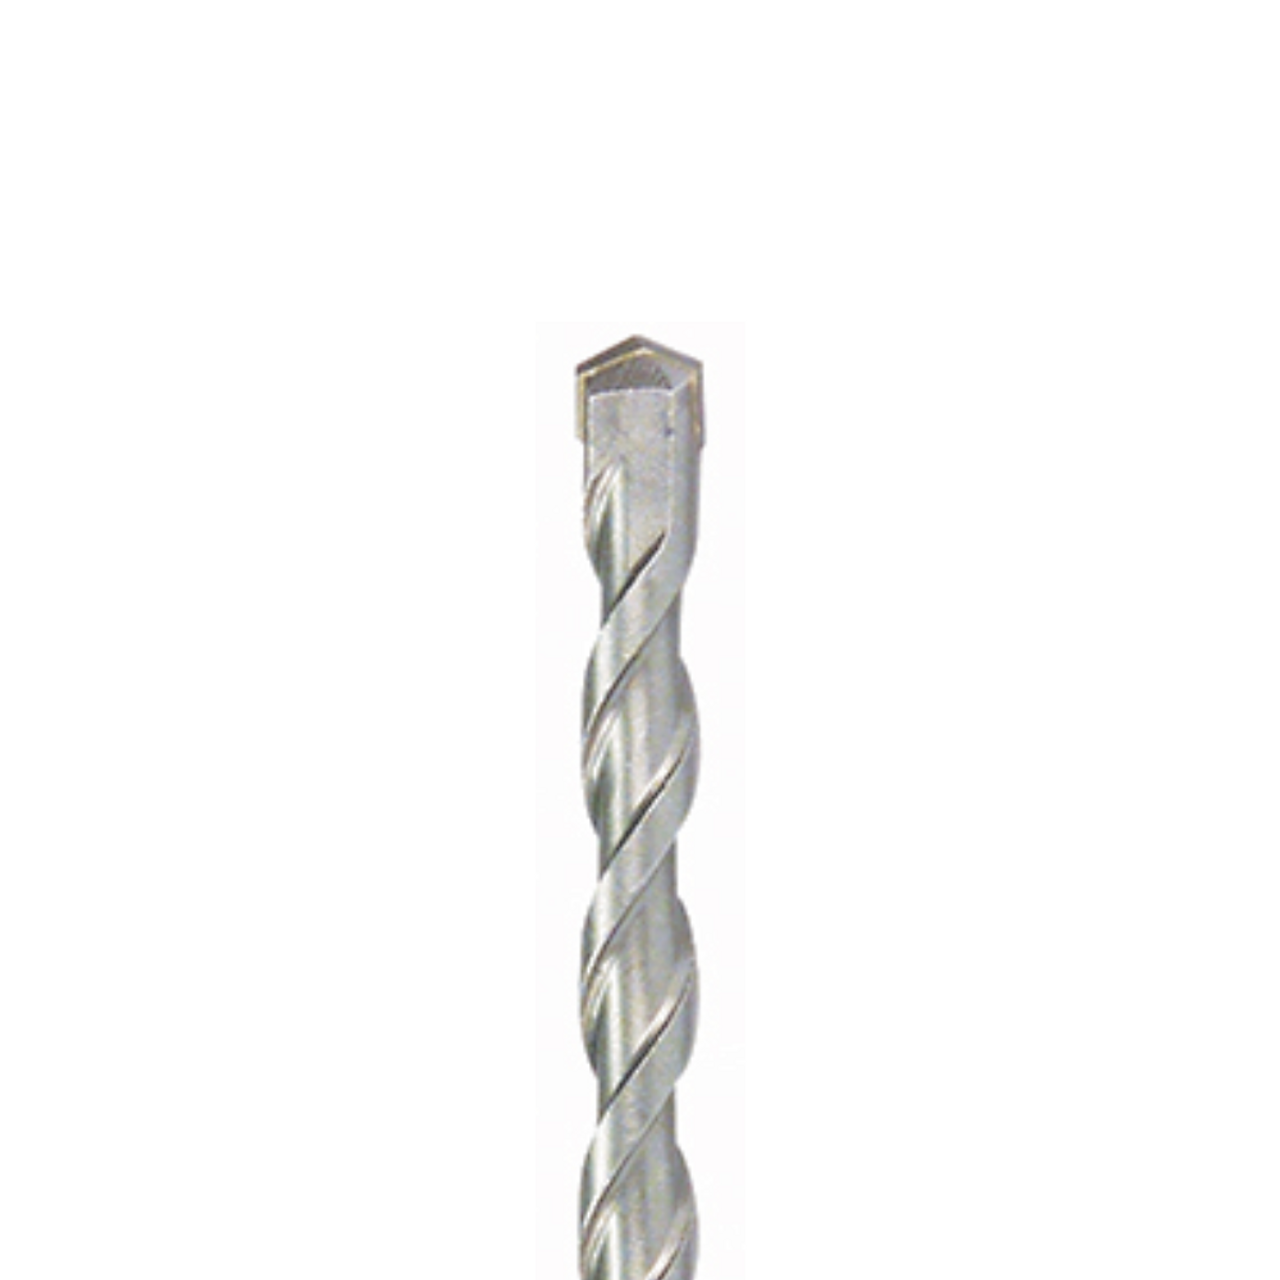 BOHRCRAFT Drill Bits | 2590 ECO Hammer Drill Bits for 400mm Depth for SDS-Plus